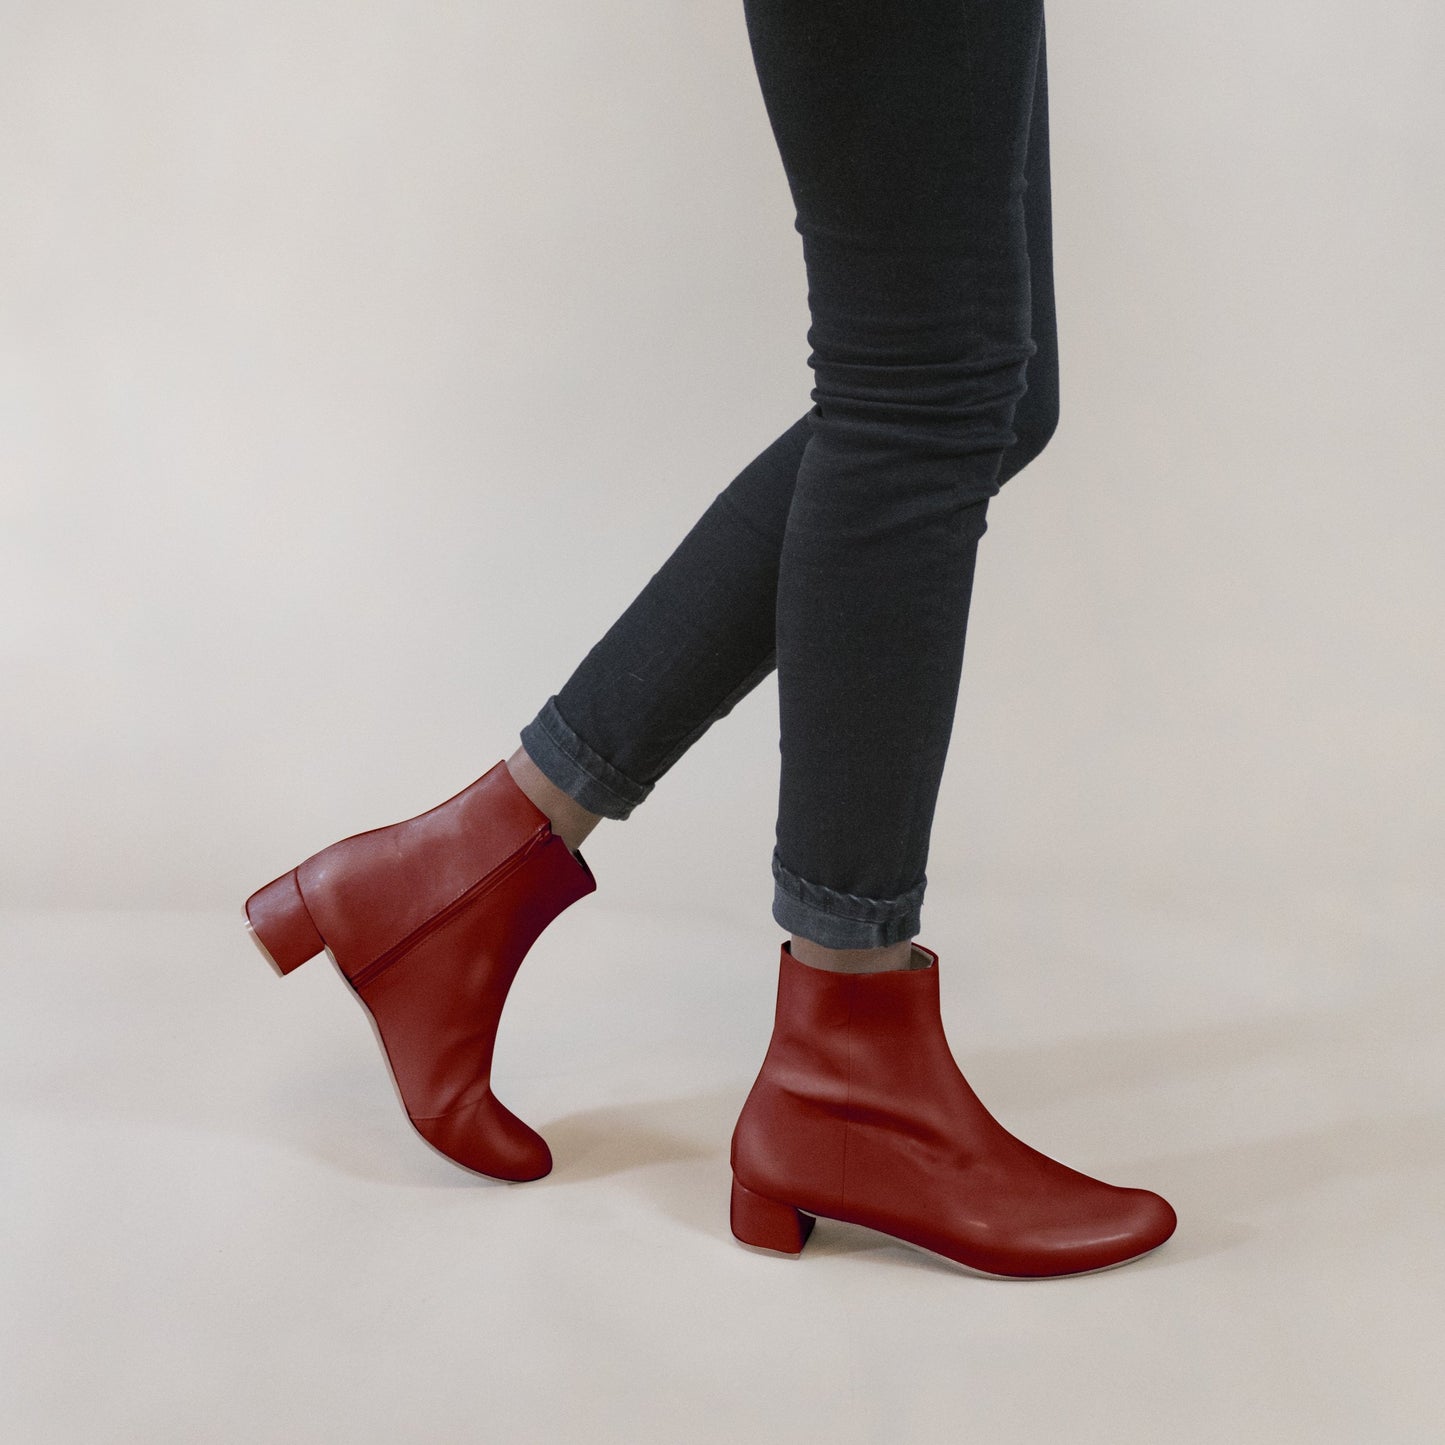 Lizzy Boot [$400]